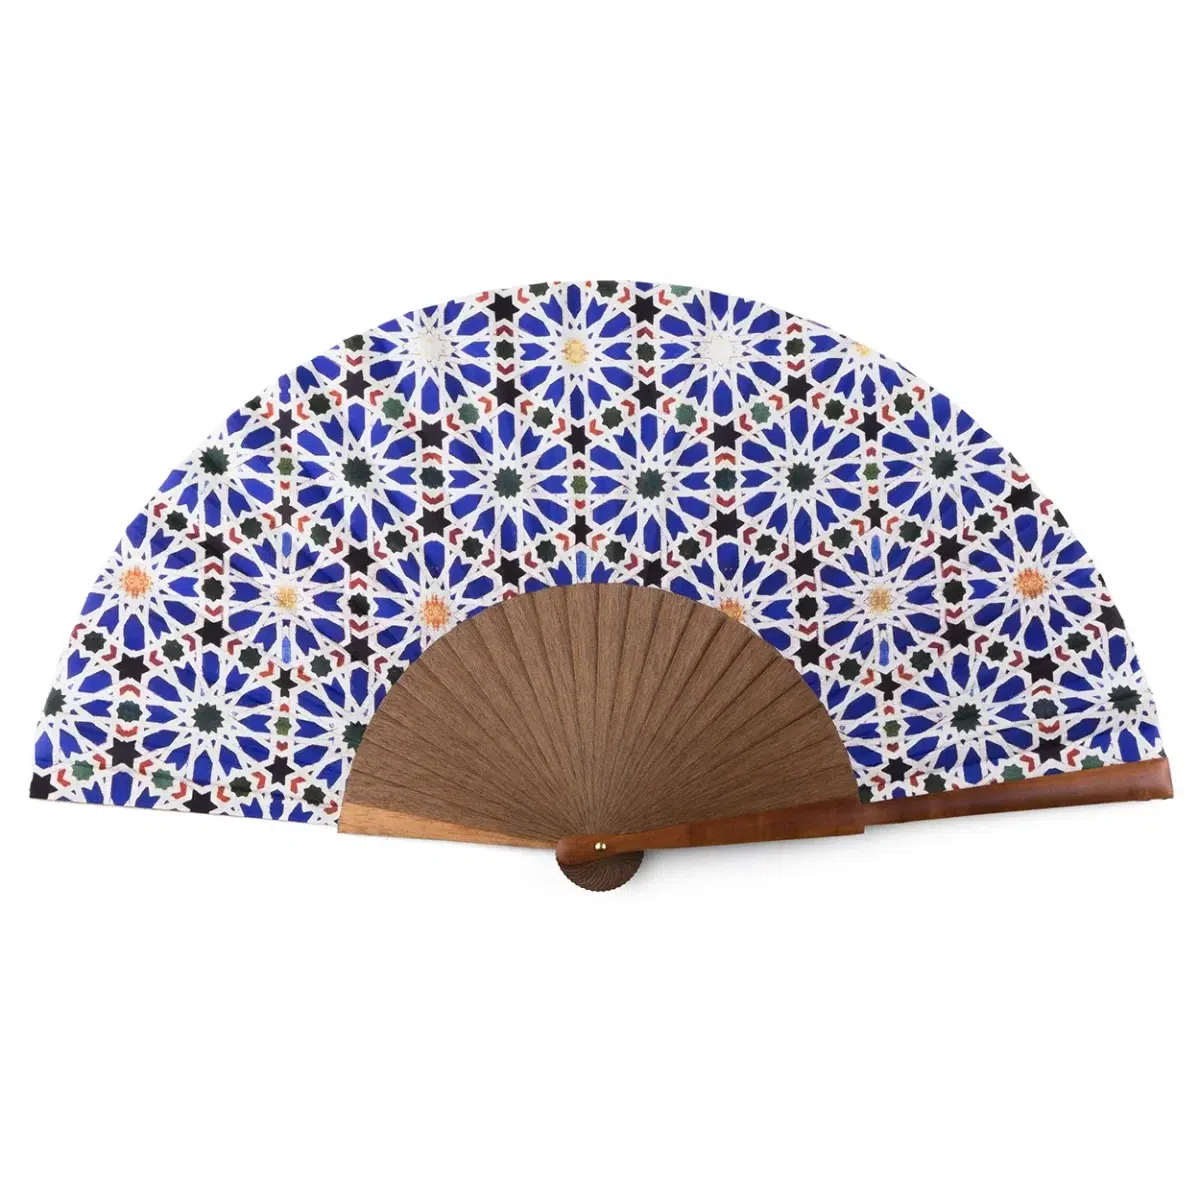 Natural Silk Fan with Blue and White Print Inspired by the Arabic Mosaics of the Alcazar of Seville.